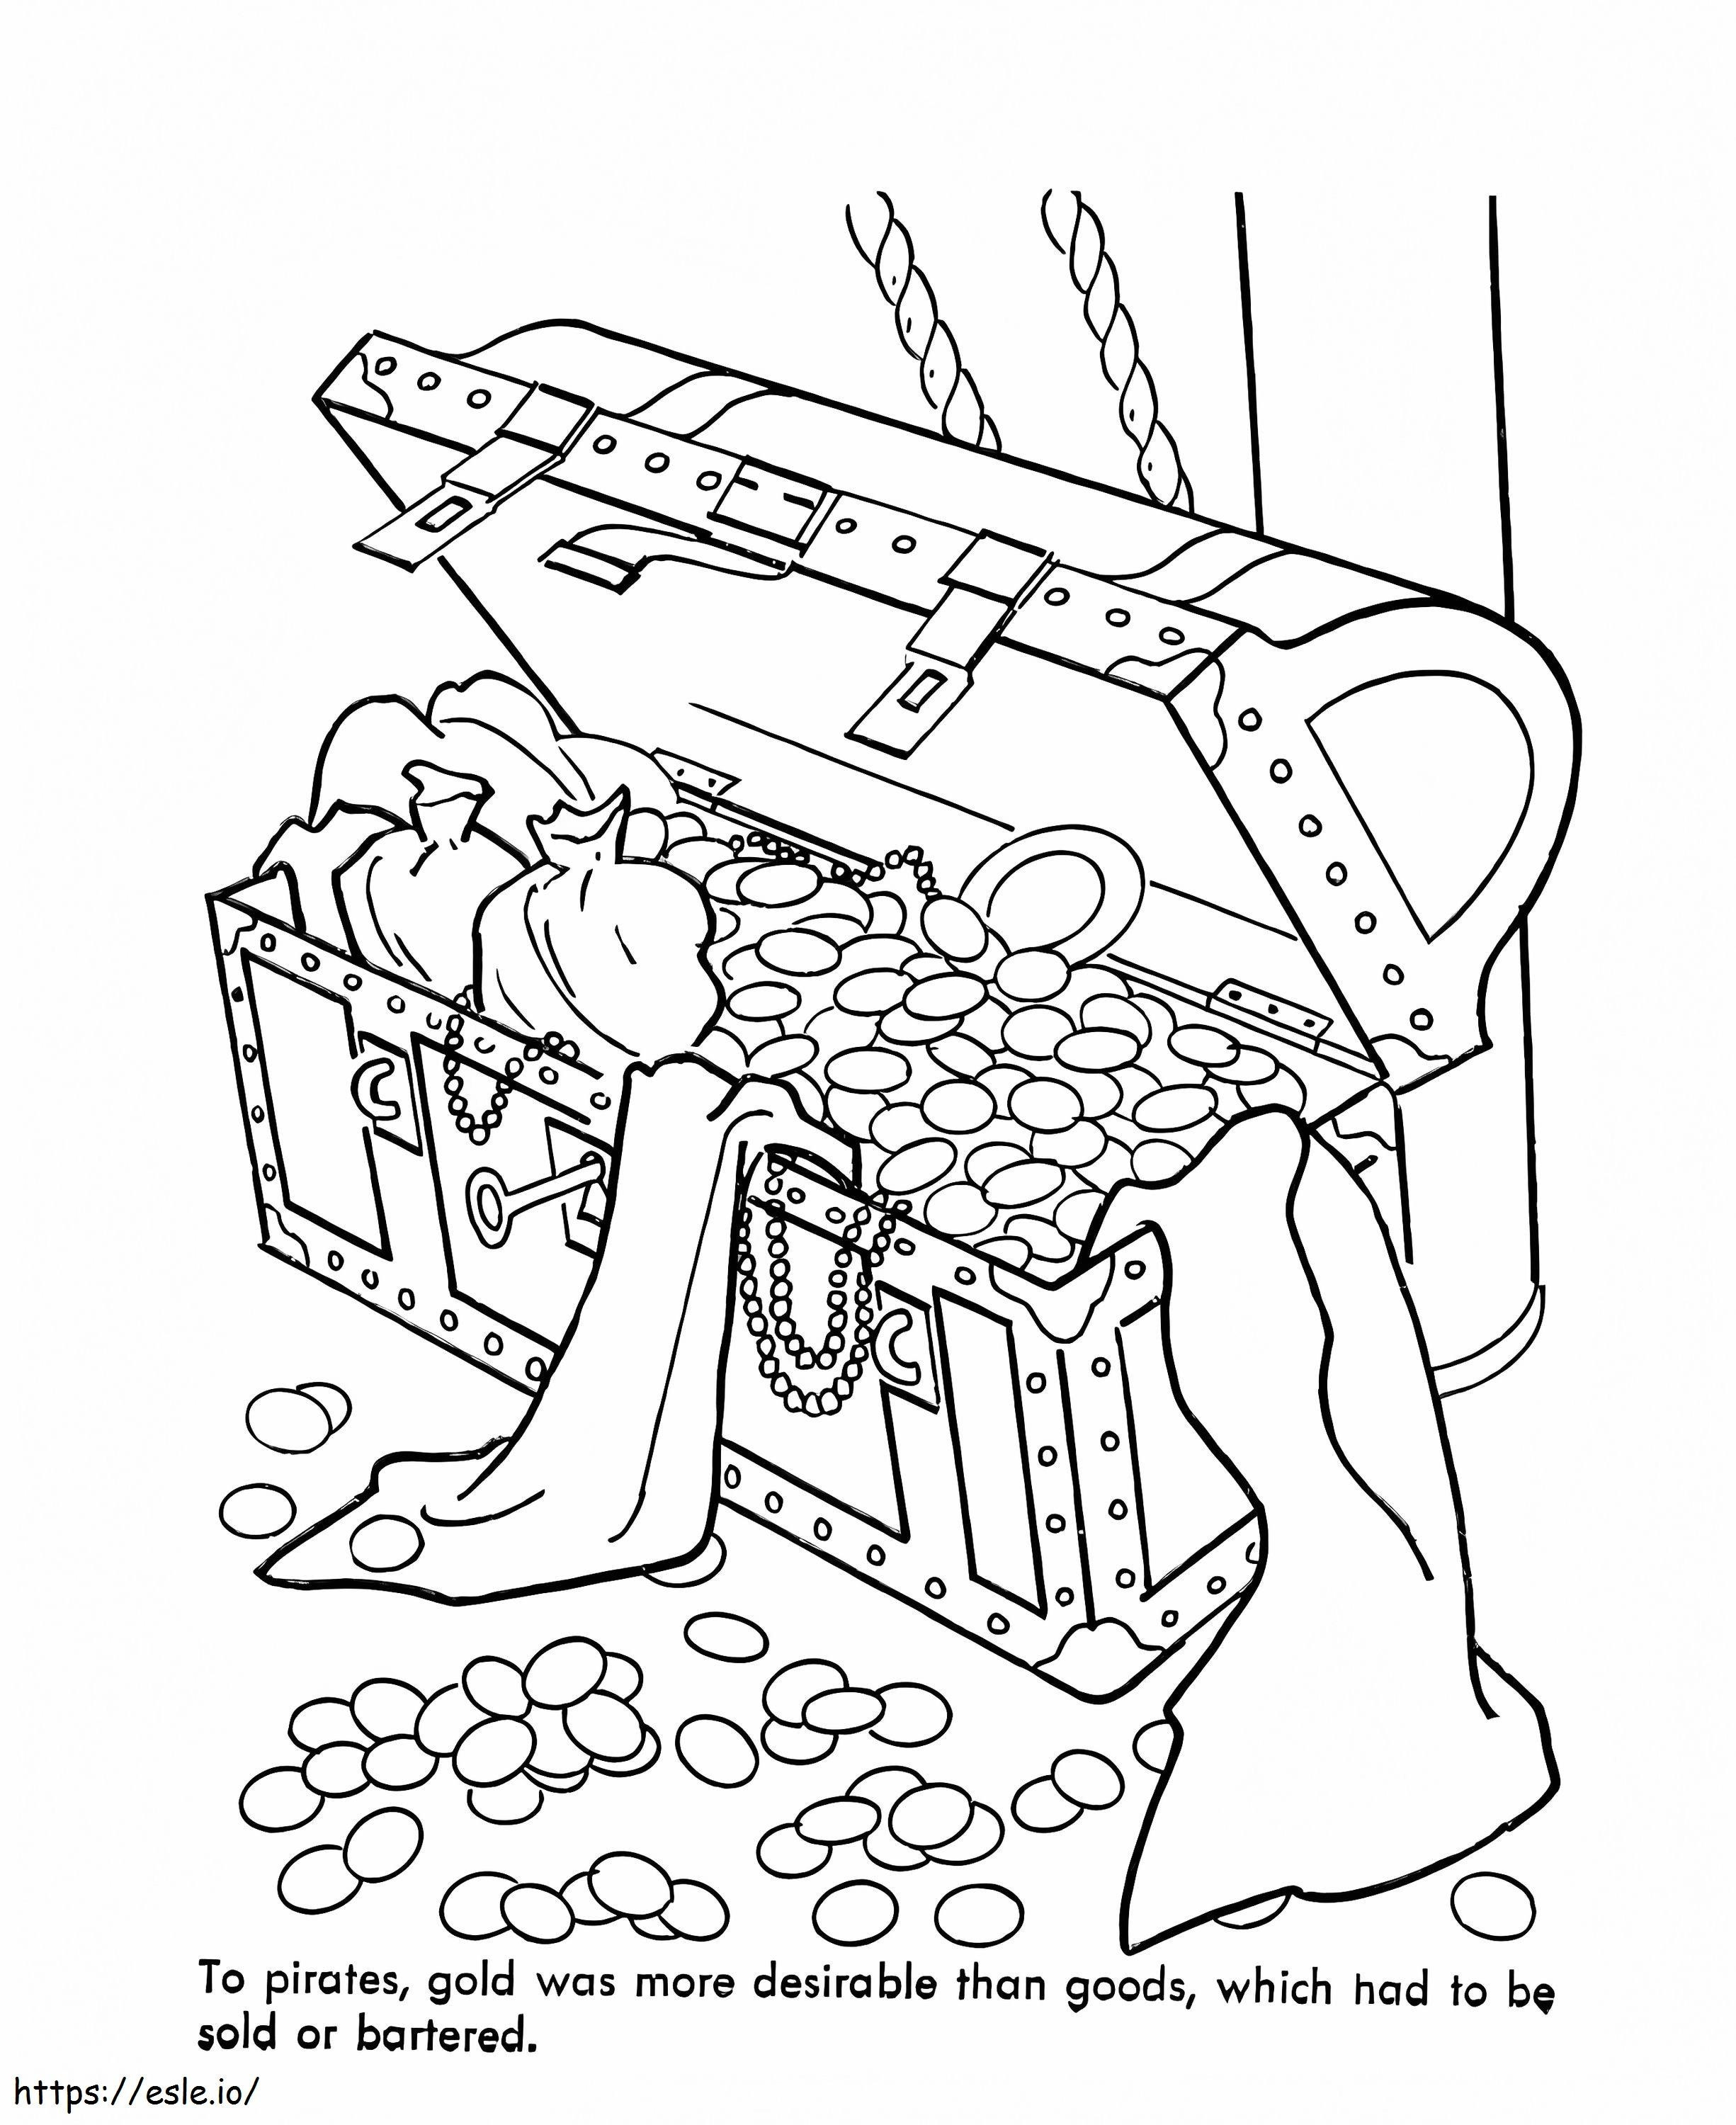 Amazing Treasure Chest coloring page